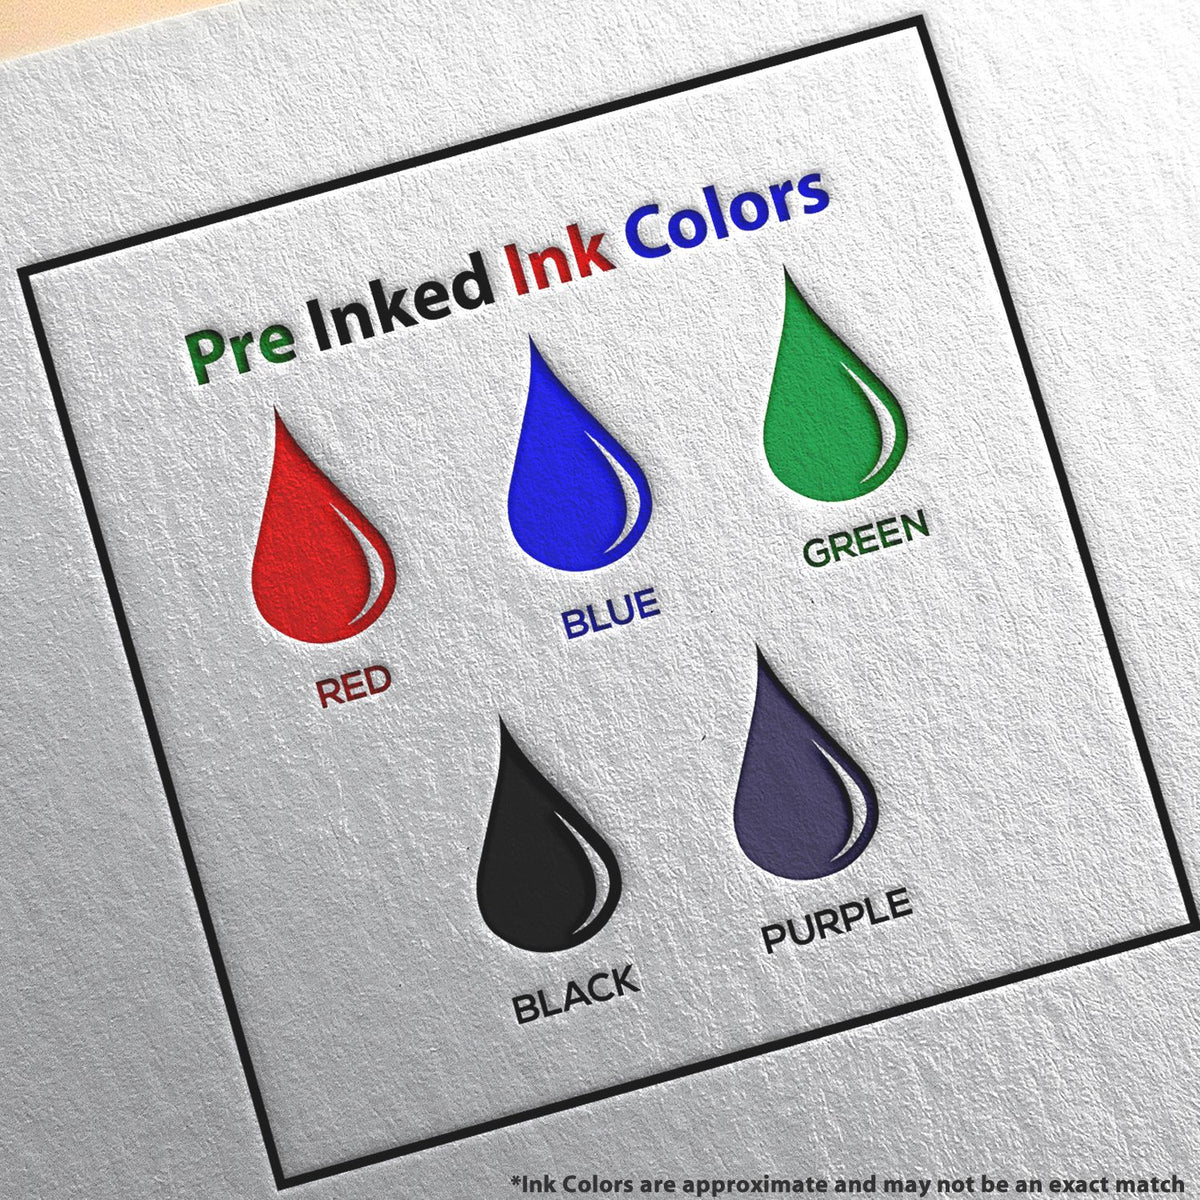 A picture showing the different ink colors or hues available for the Super Slim North Carolina Notary Public Stamp product.